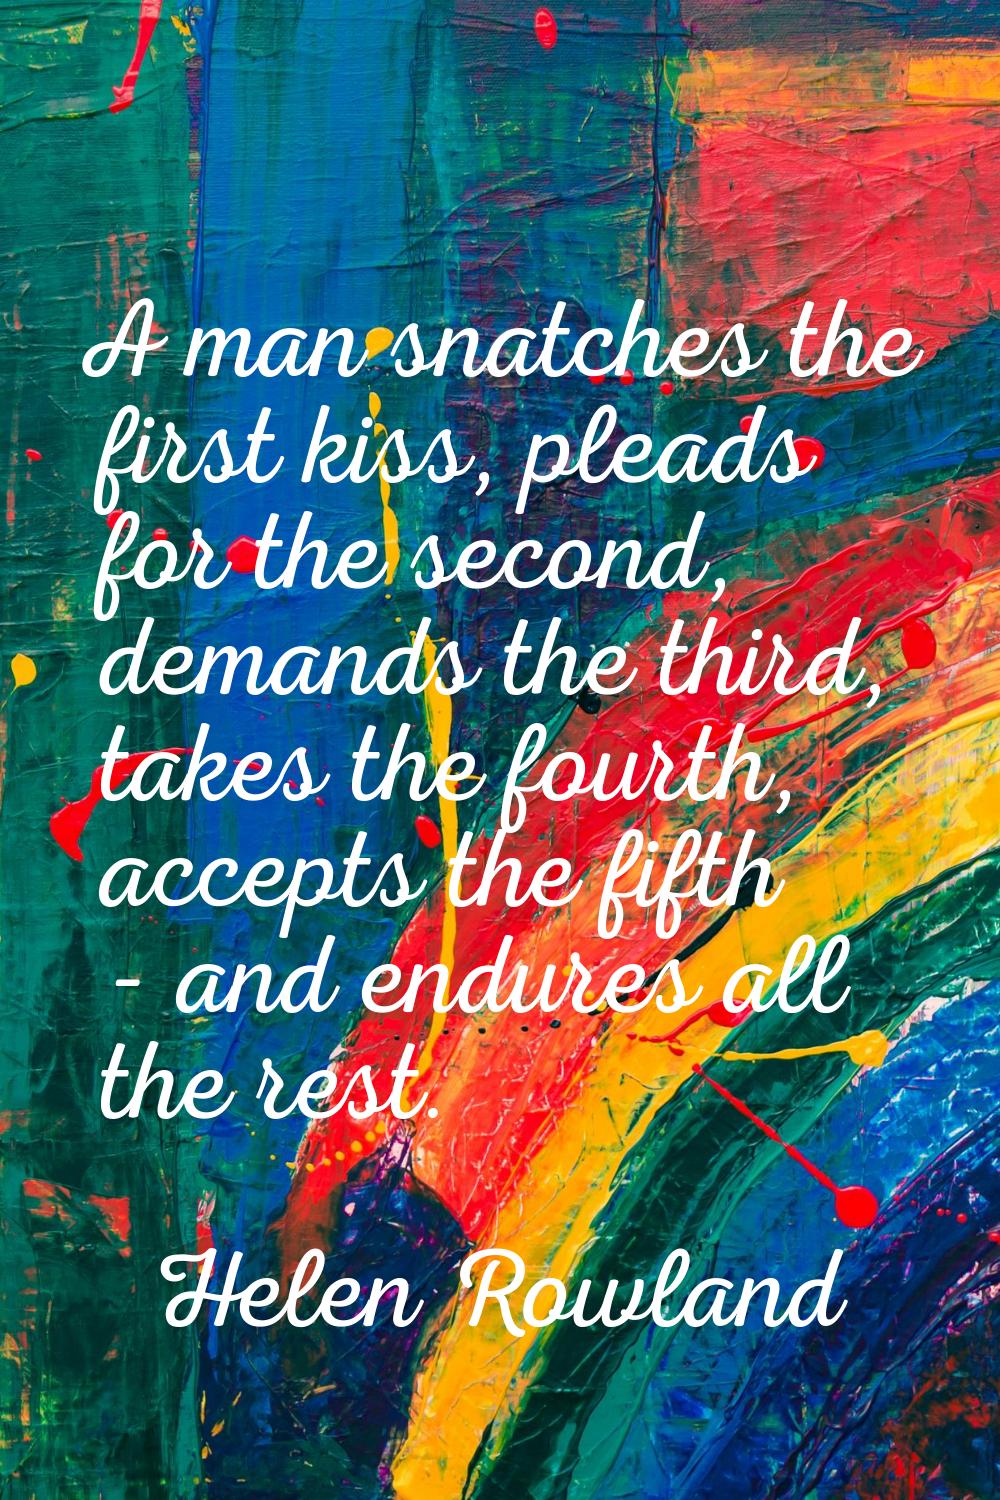 A man snatches the first kiss, pleads for the second, demands the third, takes the fourth, accepts 